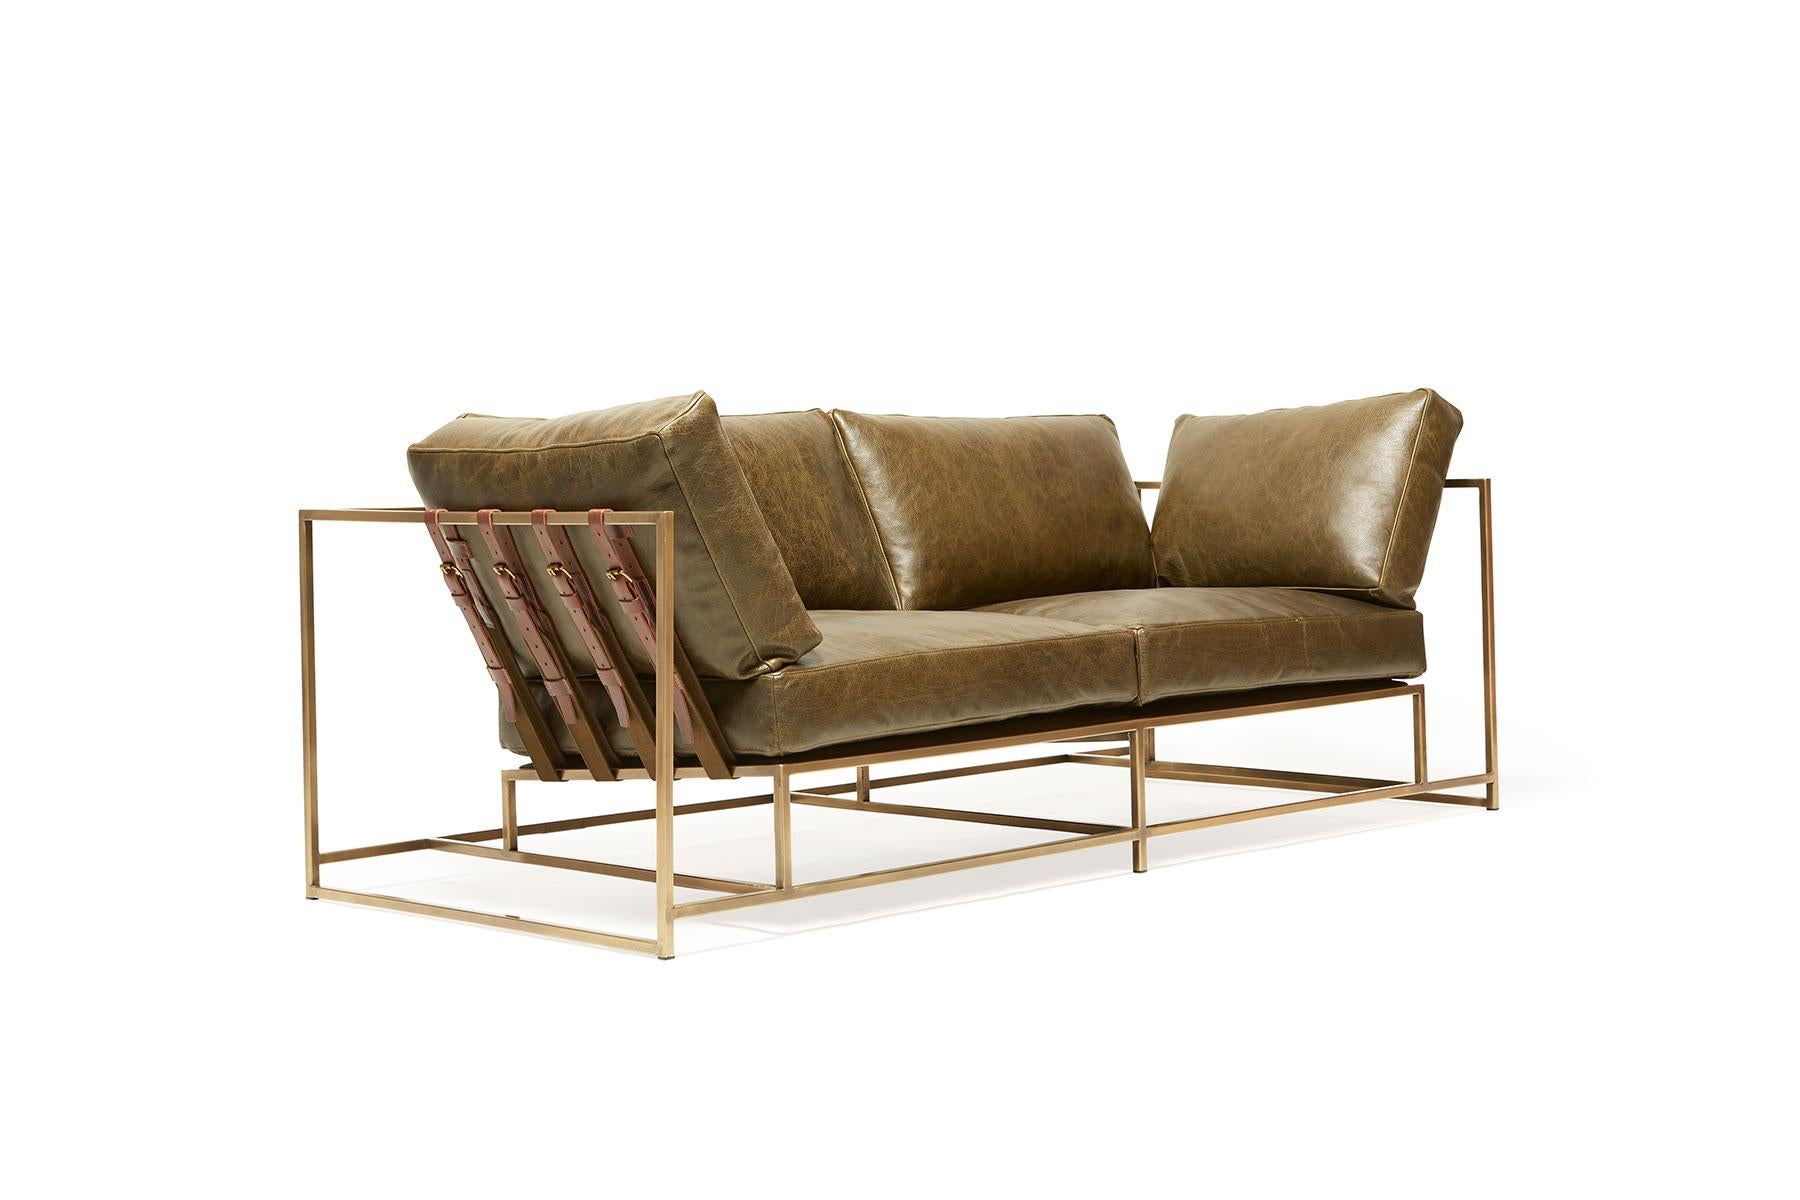 The Inheritance Two Seat Sofa by Stephen Kenn is as comfortable as it is unique. The design features an exposed construction composed of three elements - a steel frame, plush upholstery, and supportive belts. The deep seating area is perfect for a